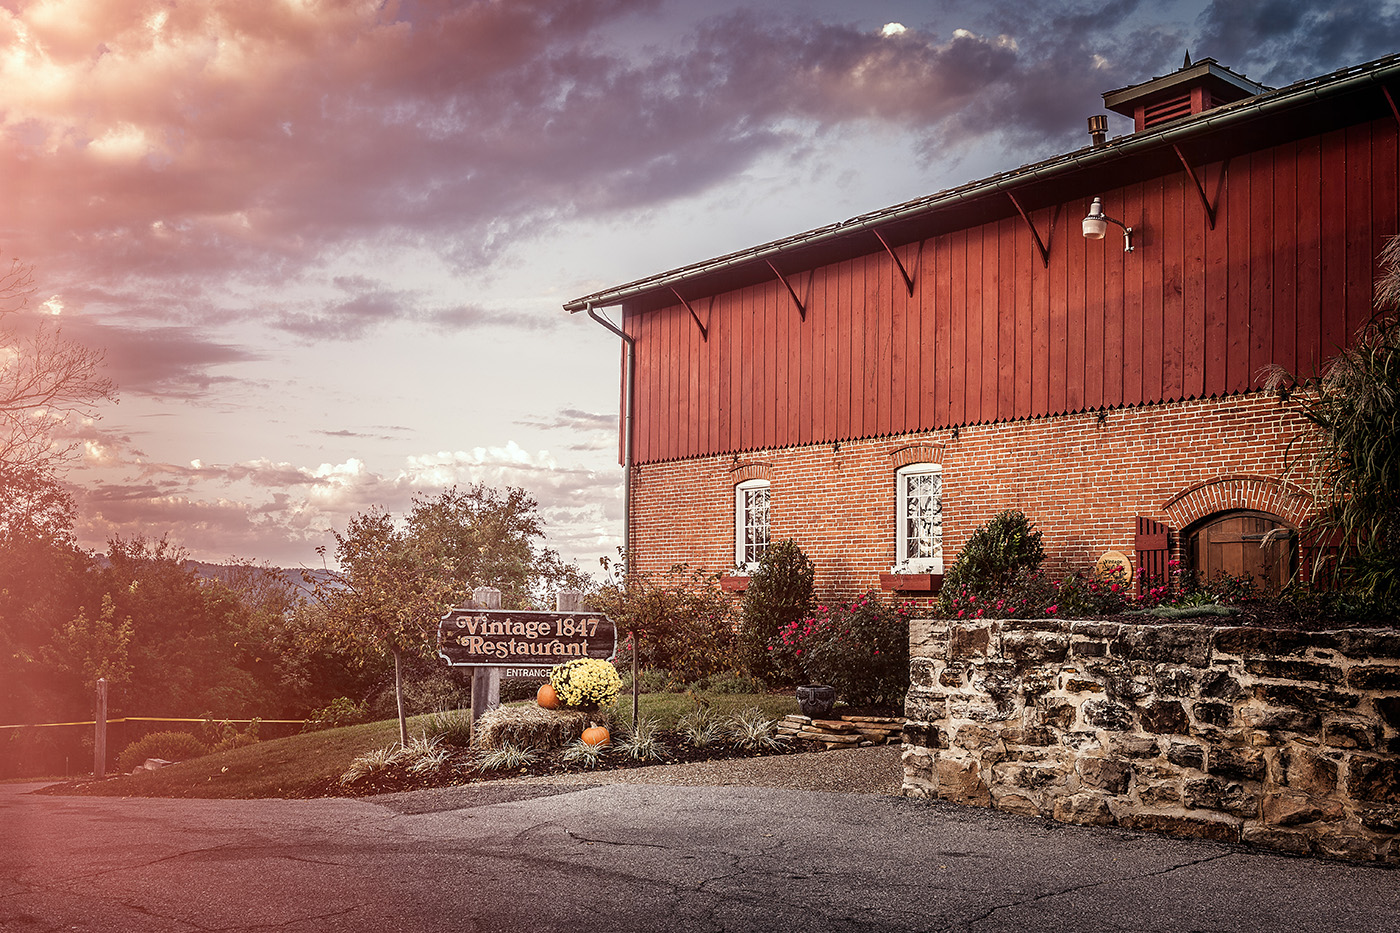 Stone Hill Winery - outdoor photo, daytime, an exterior photo of a large red building with a cloudy sky in the background.